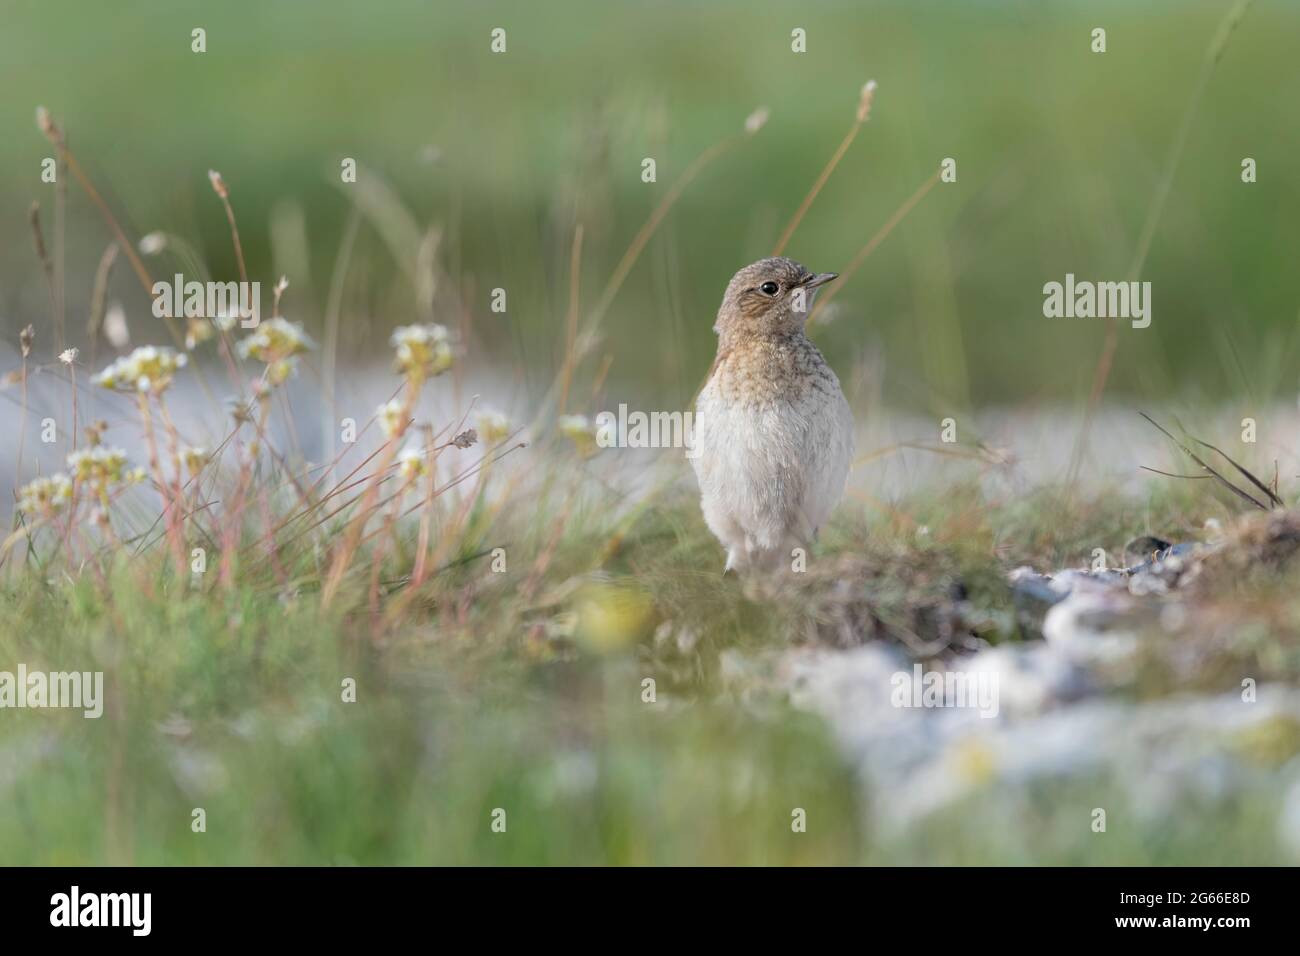 Young wheatear bird waits mom to feed (Oenanthe oenanthe) Stock Photo